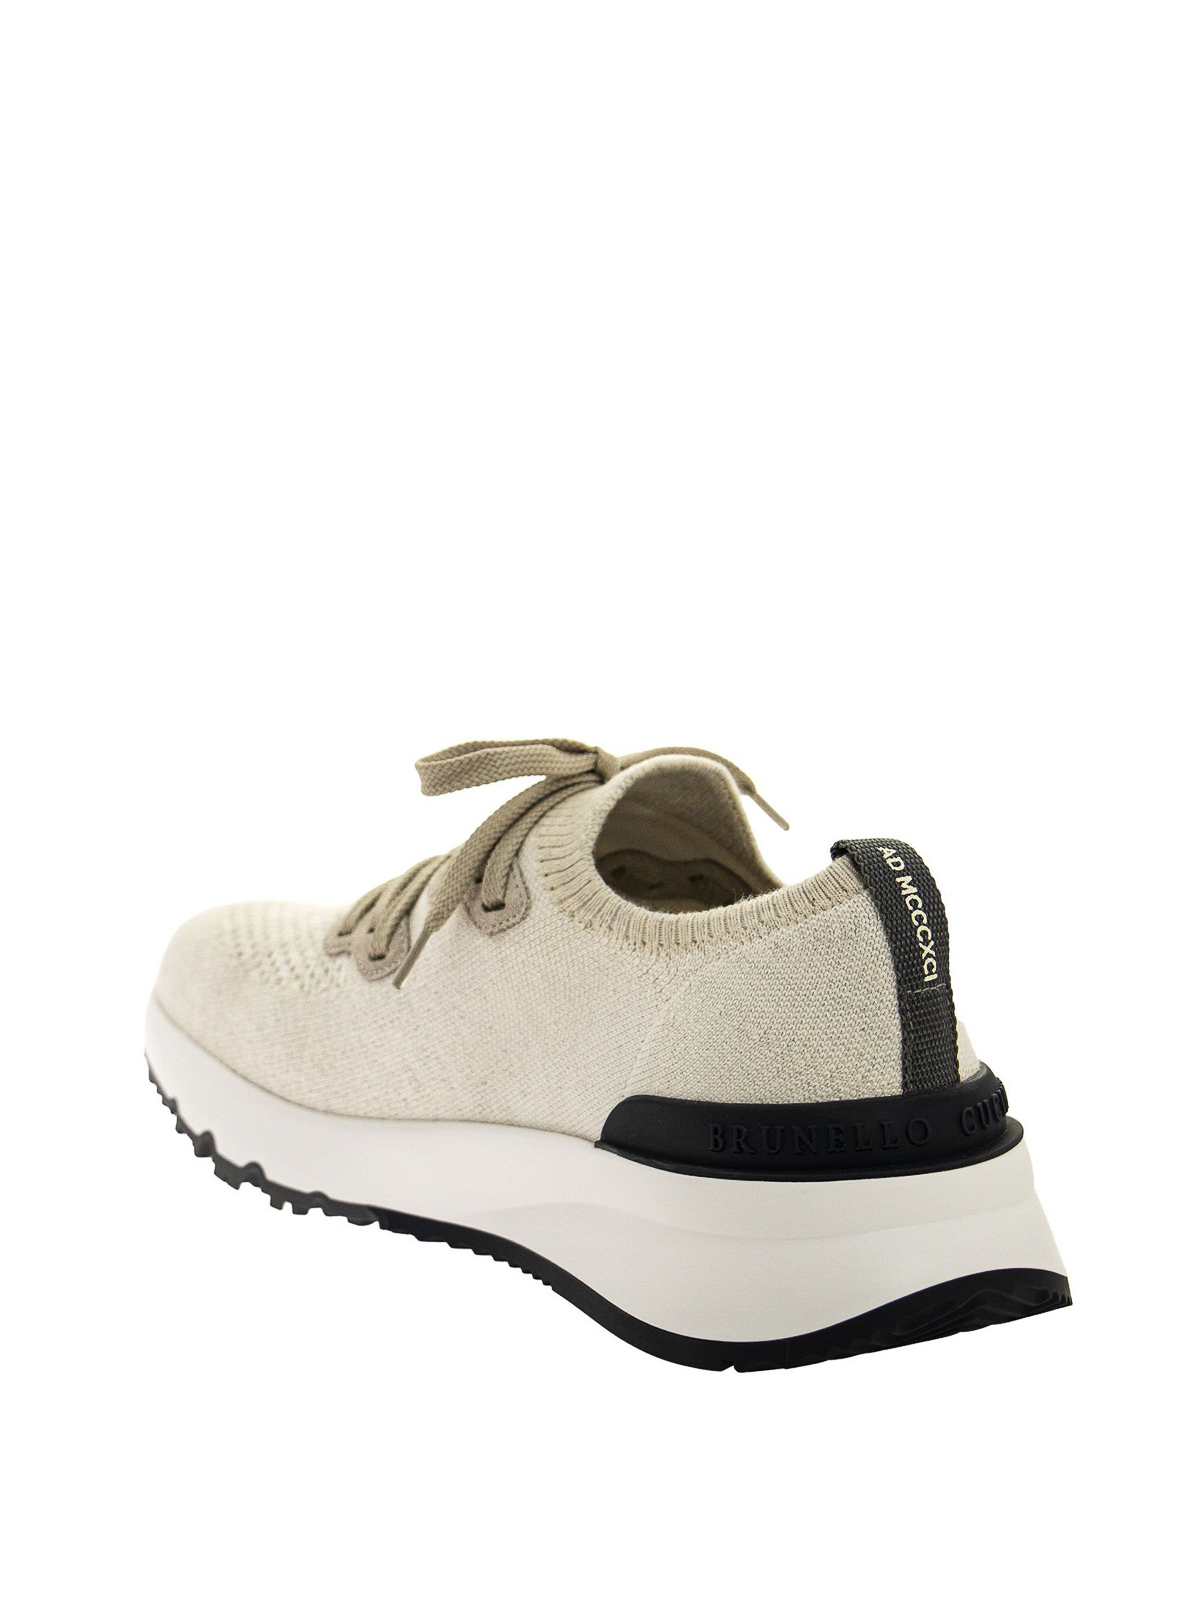 Shop Brunello Cucinelli Cotton Knit Sneakers In Beis Claro